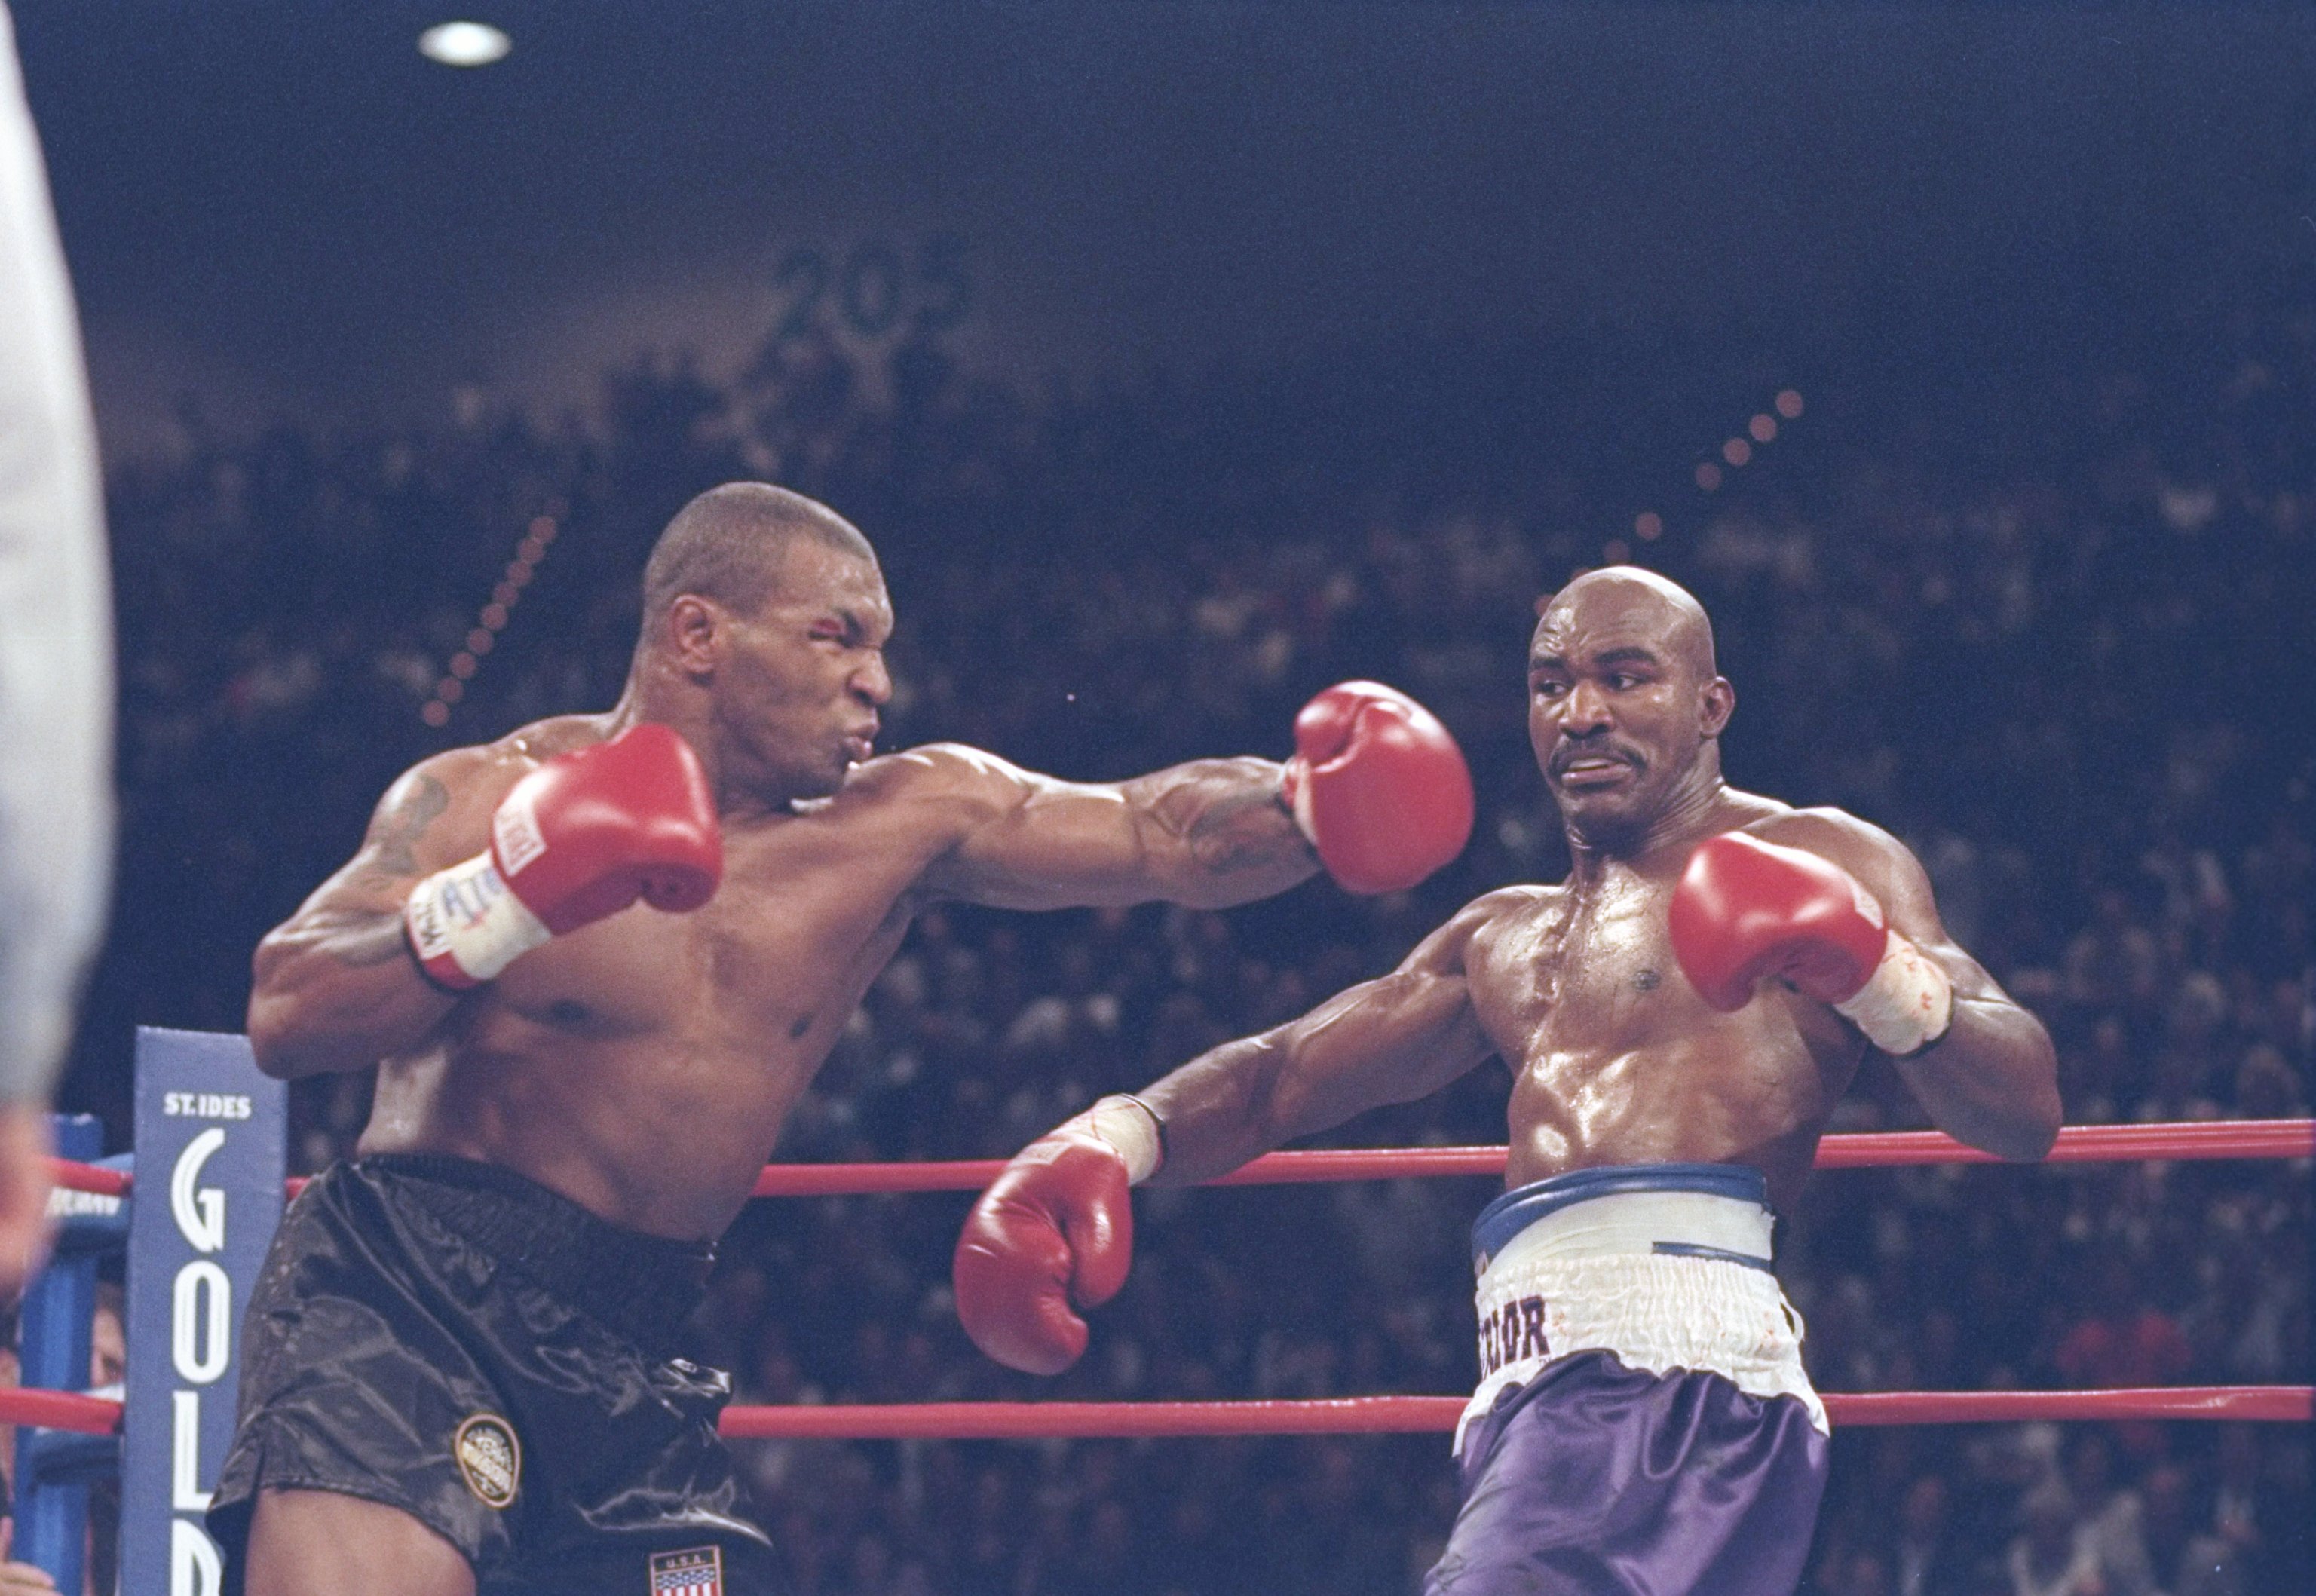 28 Jun 1997: Mike Tyson misses with a left as Evander Holyfield steps aside during their heavyweight title fight at the MGM Grand Garden in Las Vegas, Nevada. Holyfield won the fight when referee Mills Lane disqualified Tyson in the third round after biti